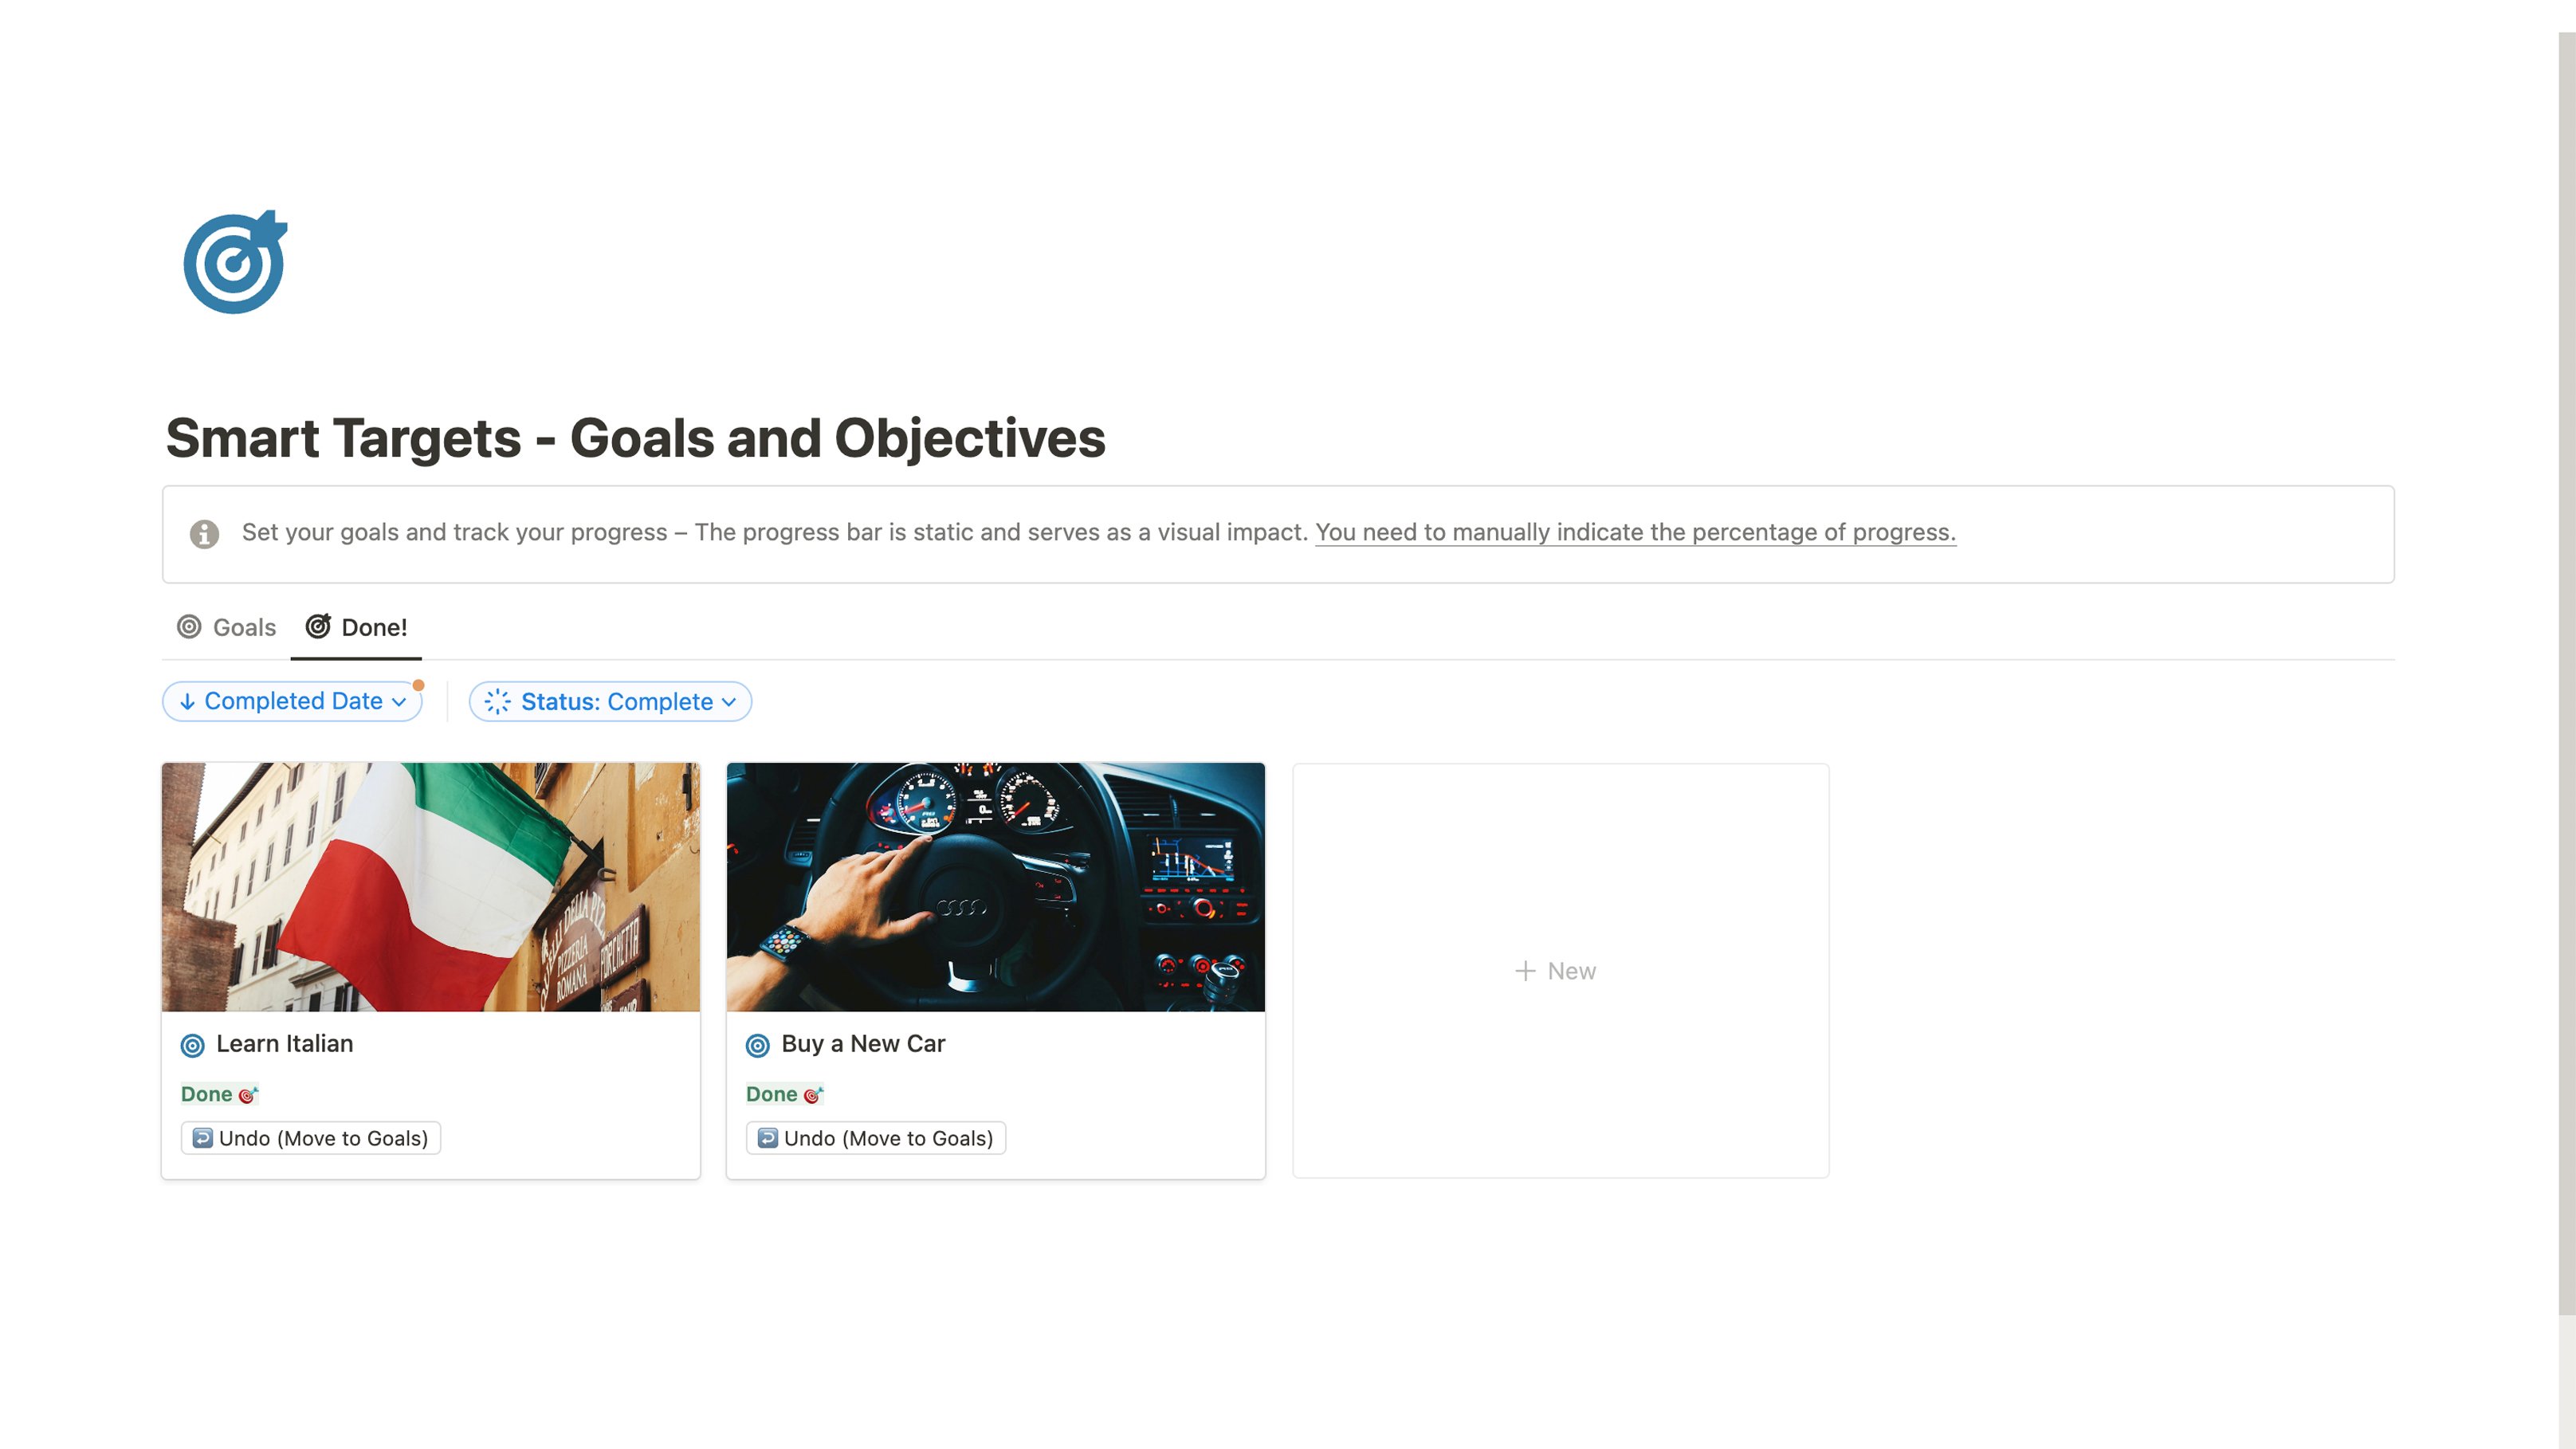 Transforms goal setting with its clear interface, featuring visual progress bars, comprehensive management, and options to personalize goals with notes and images. Ideal for those aiming for personal and professional excellence, it simplifies systematic goal achievement.